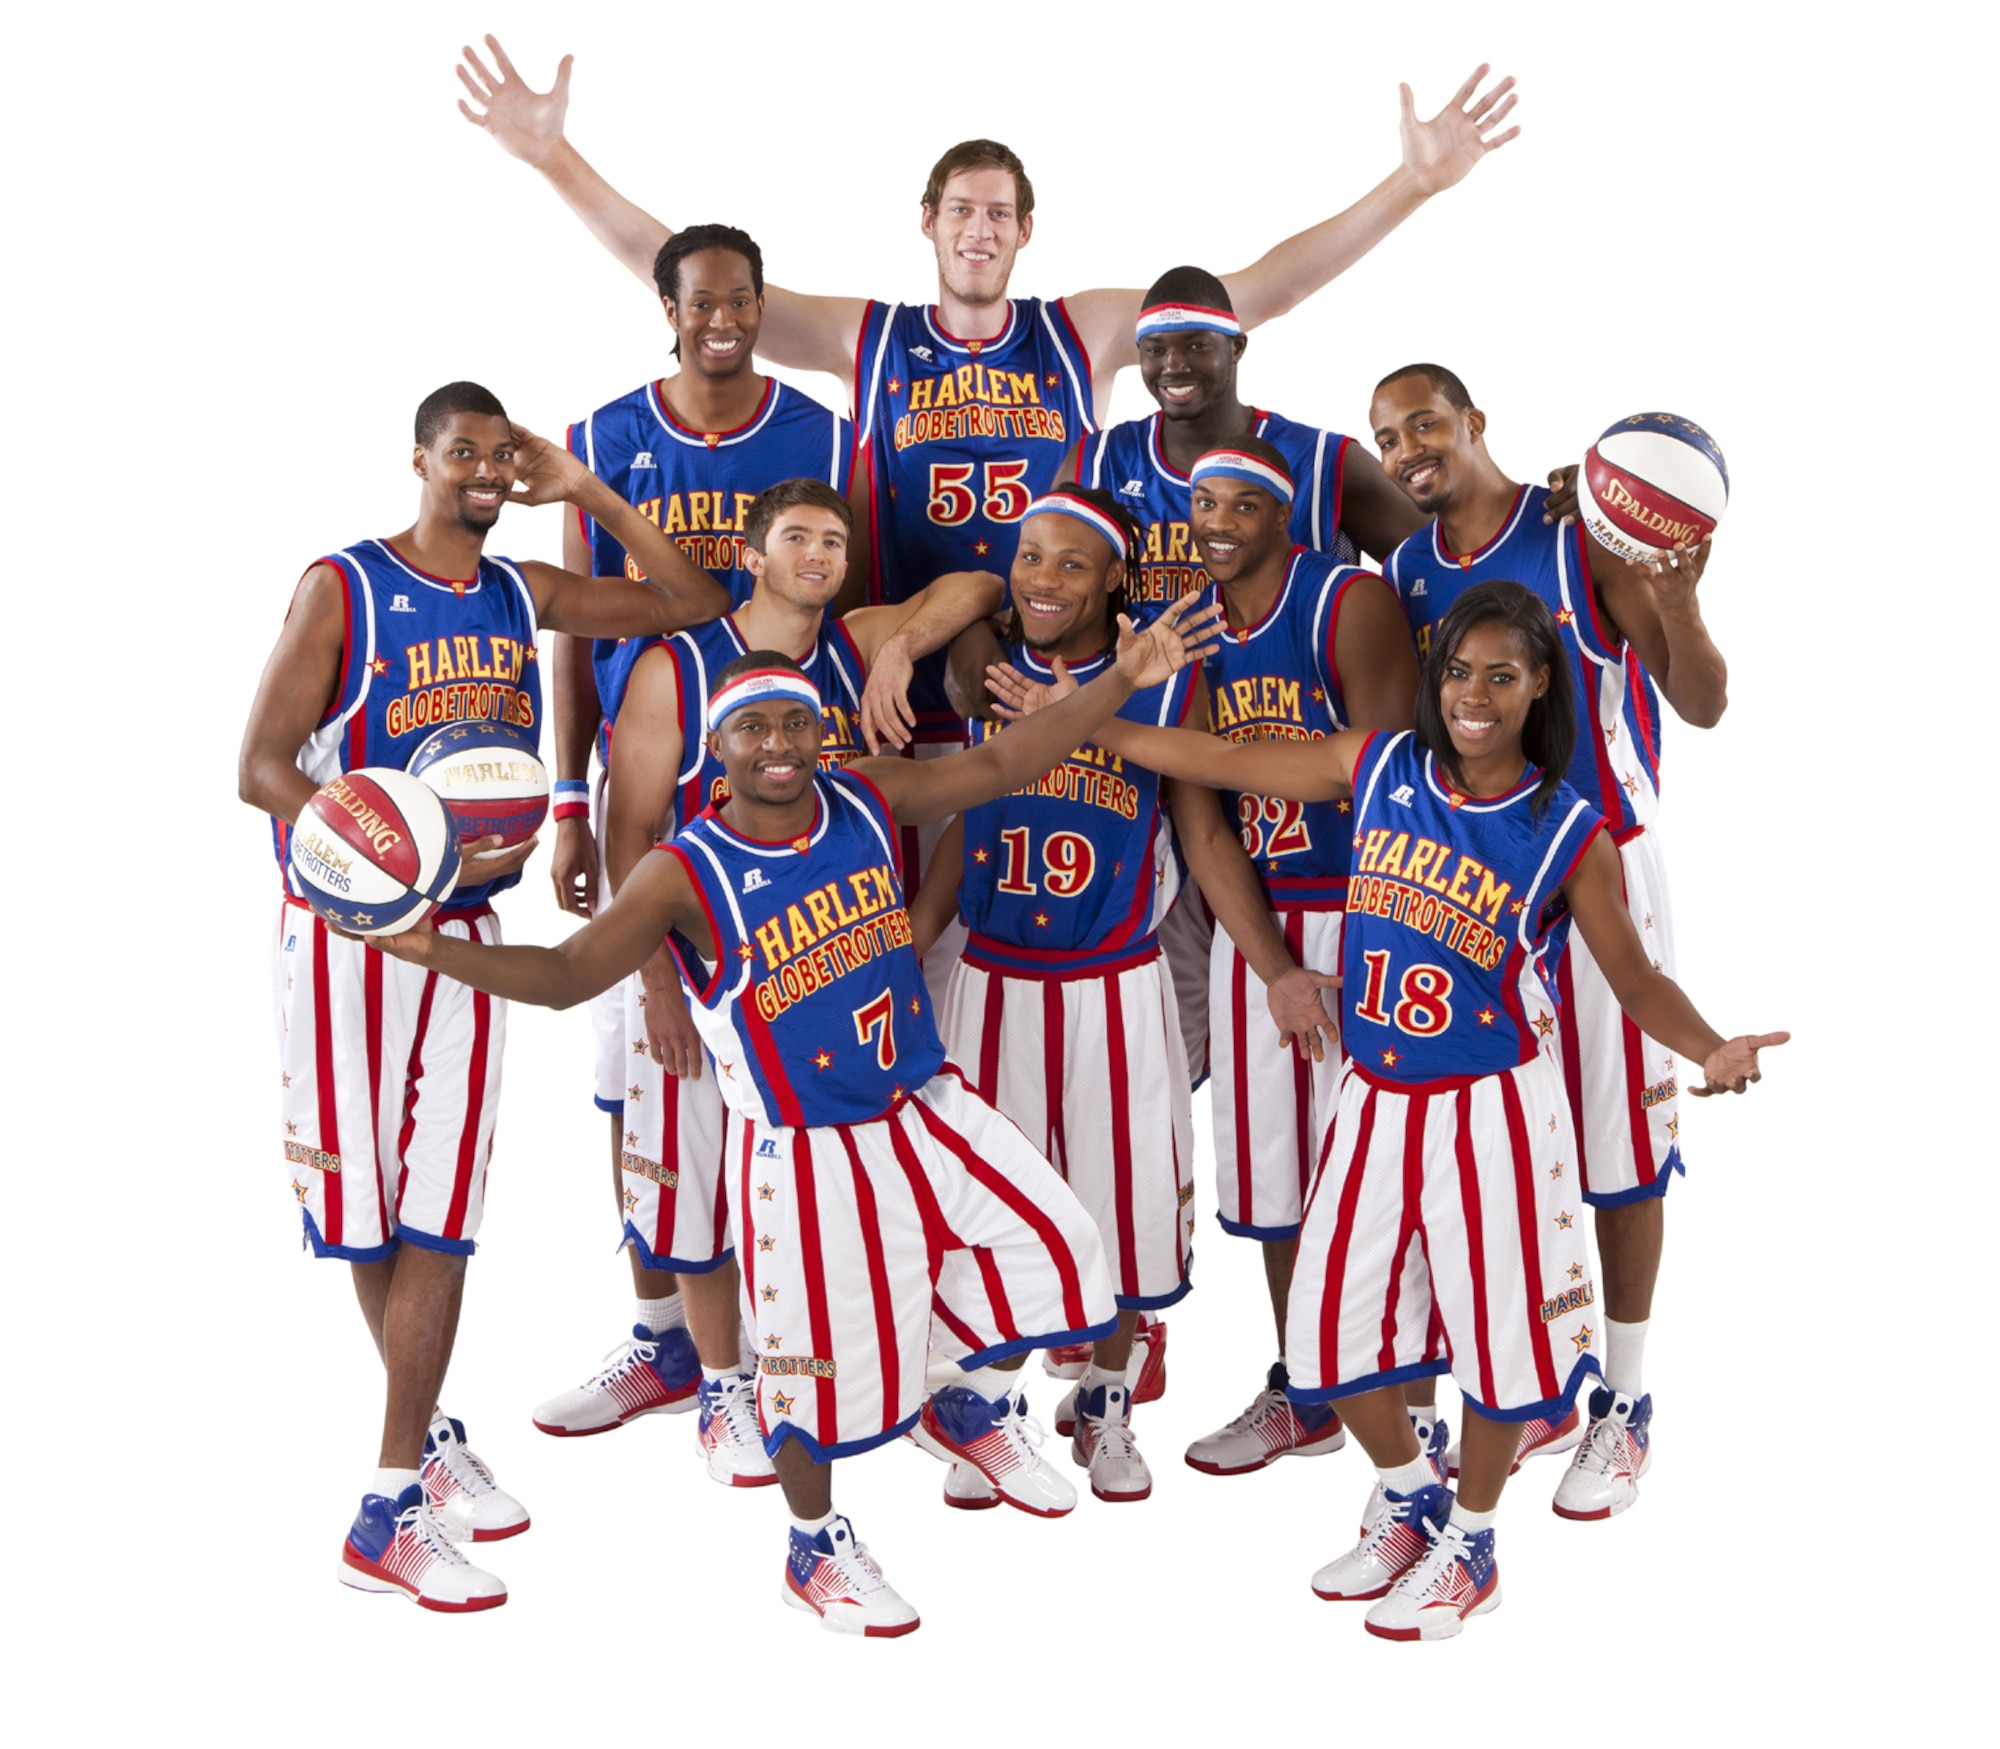 Harlem Globetrotters headed to Montana during February > Malmstrom Air